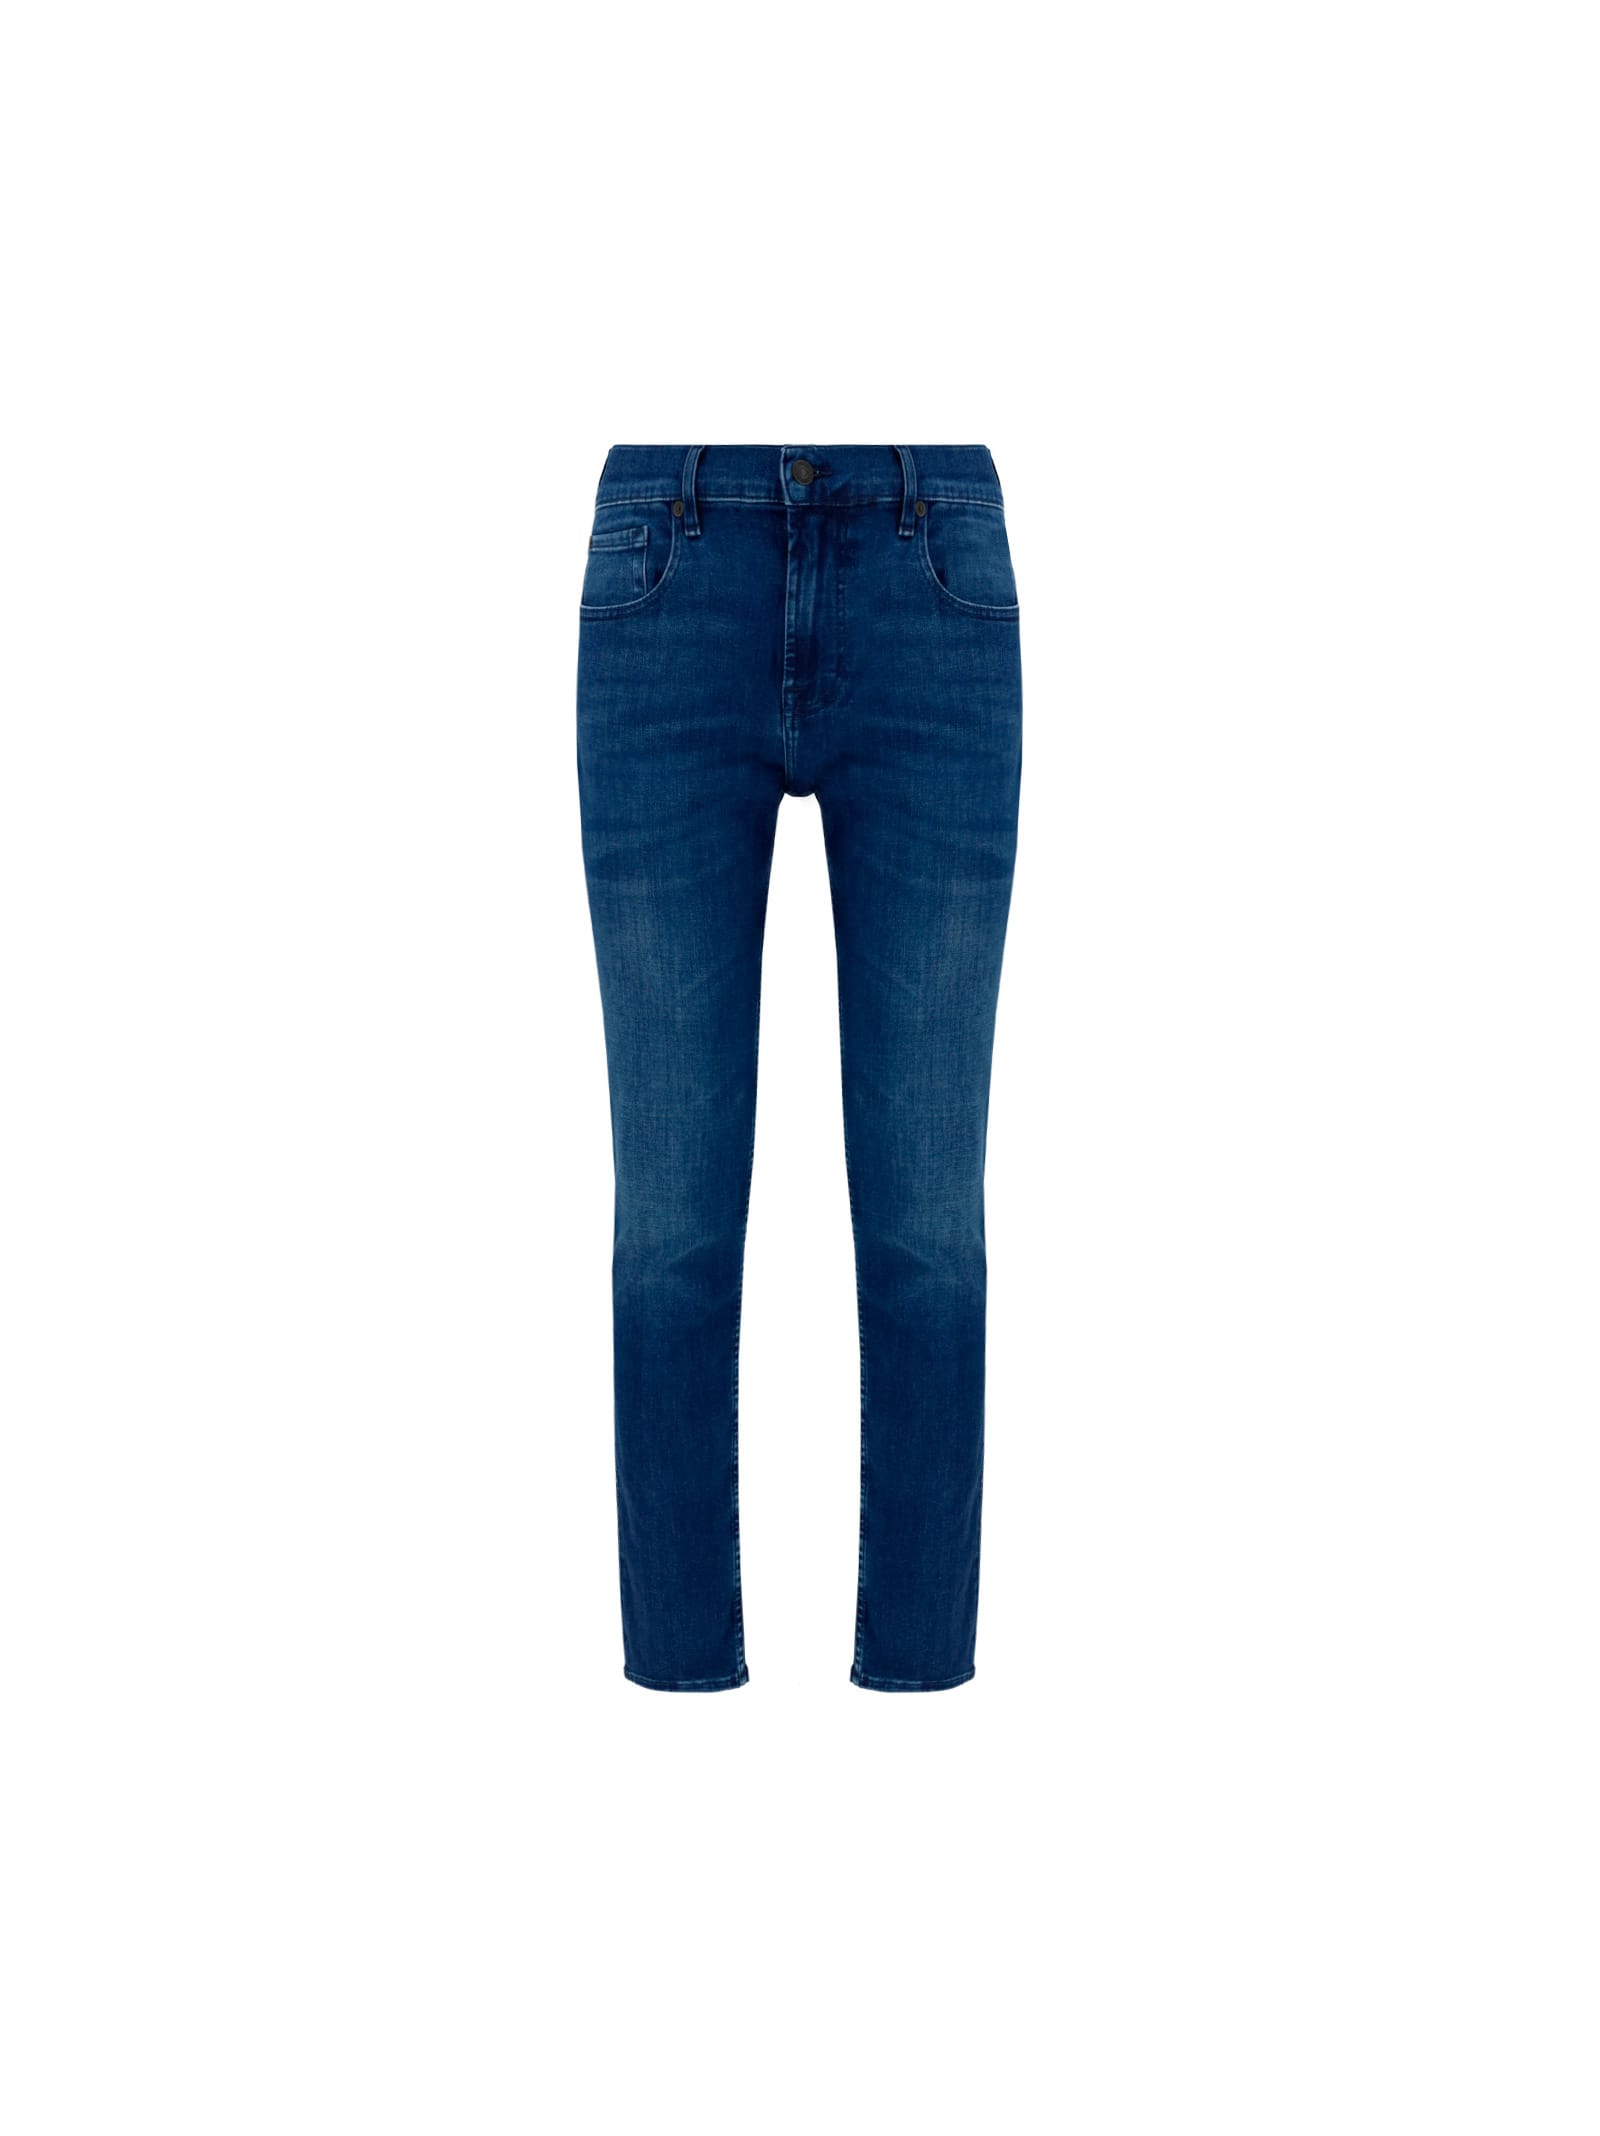 7 For All Mankind 7 For Slimmy Tapered Stretch Jeans